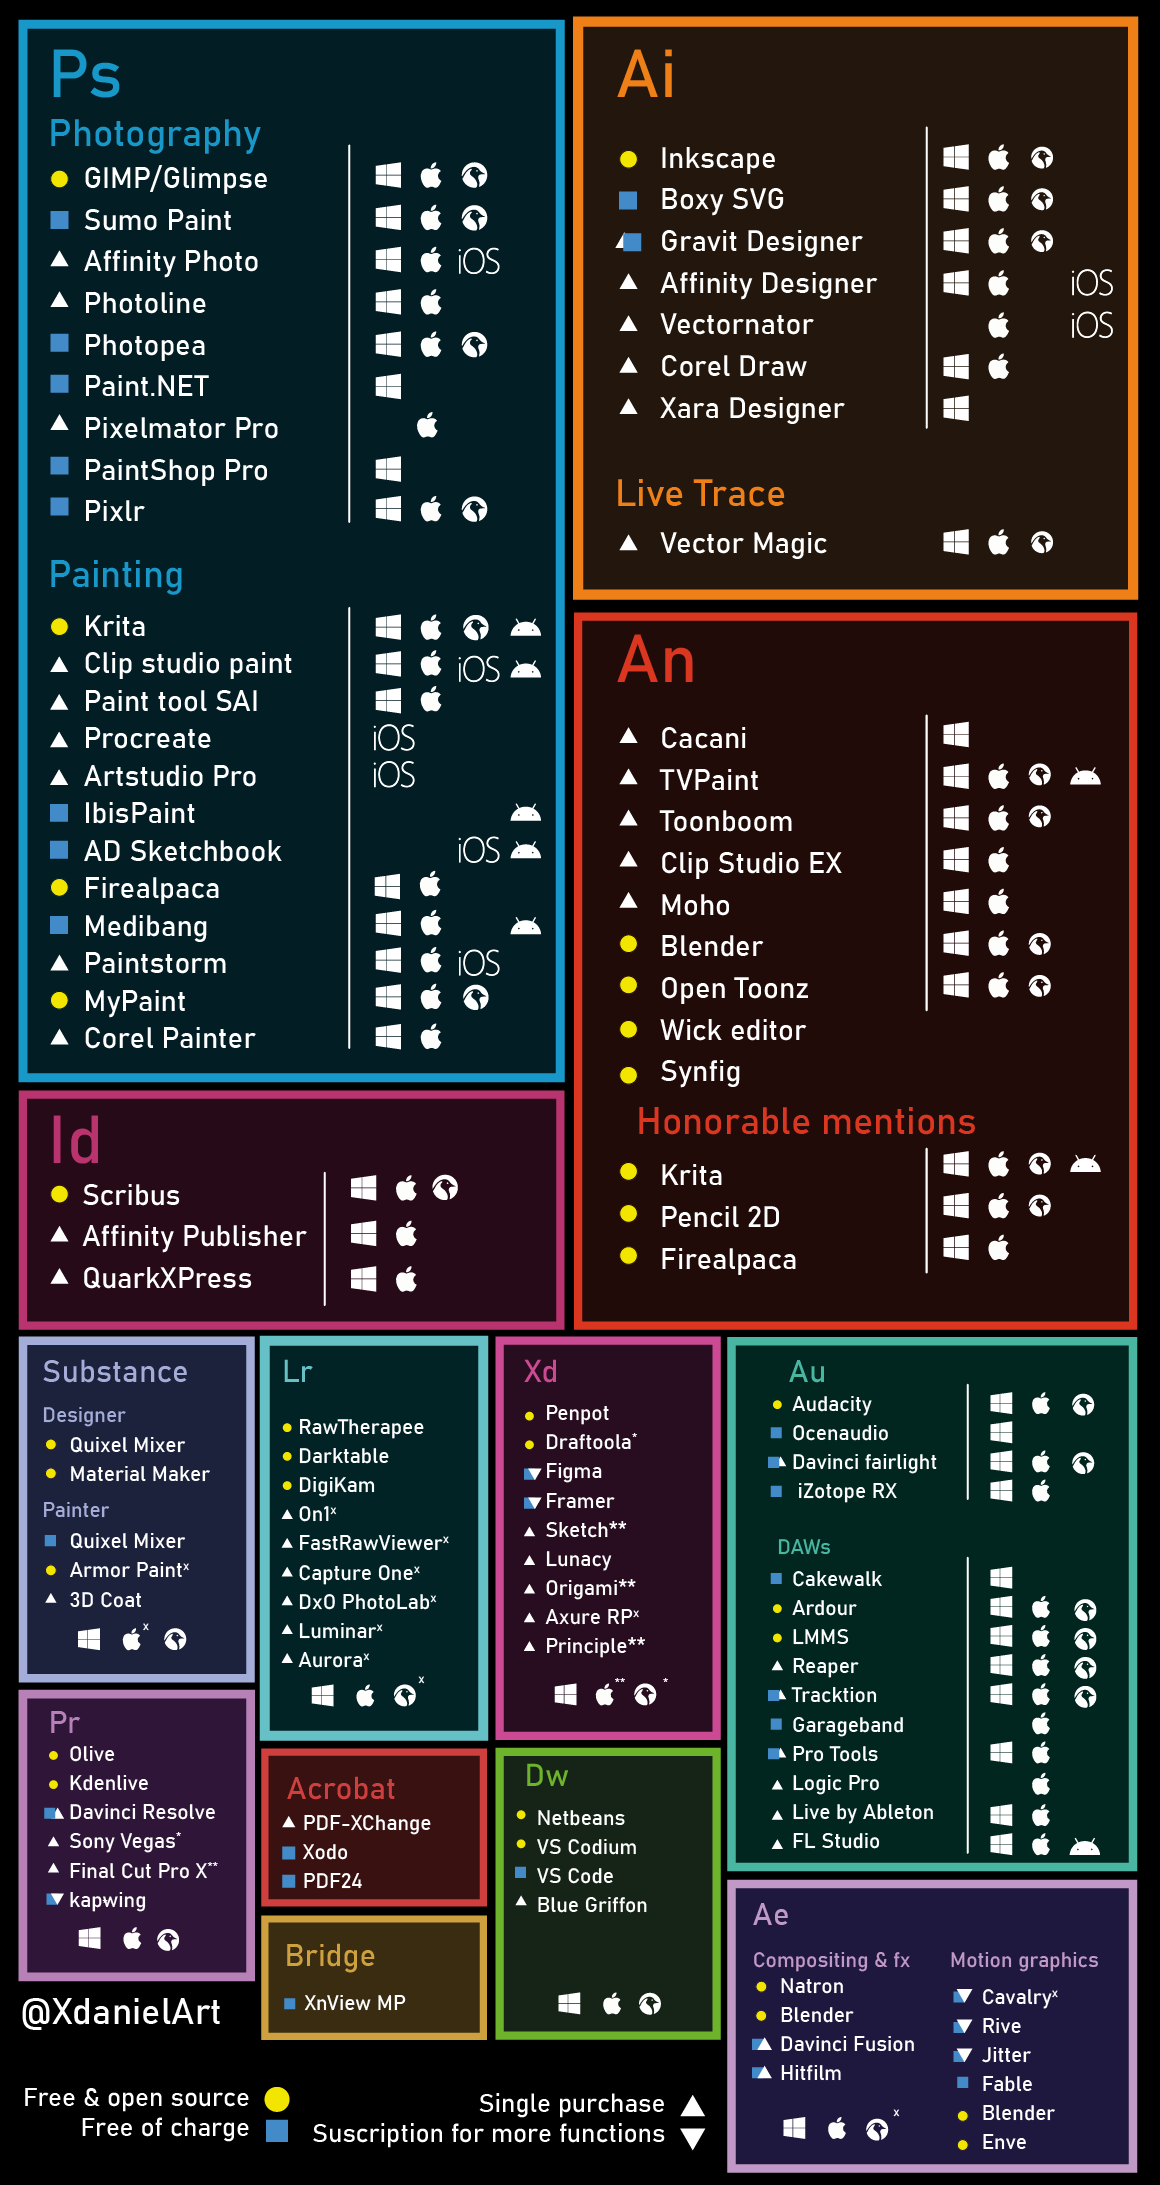 A list of alternatives to each of Adobe's products.